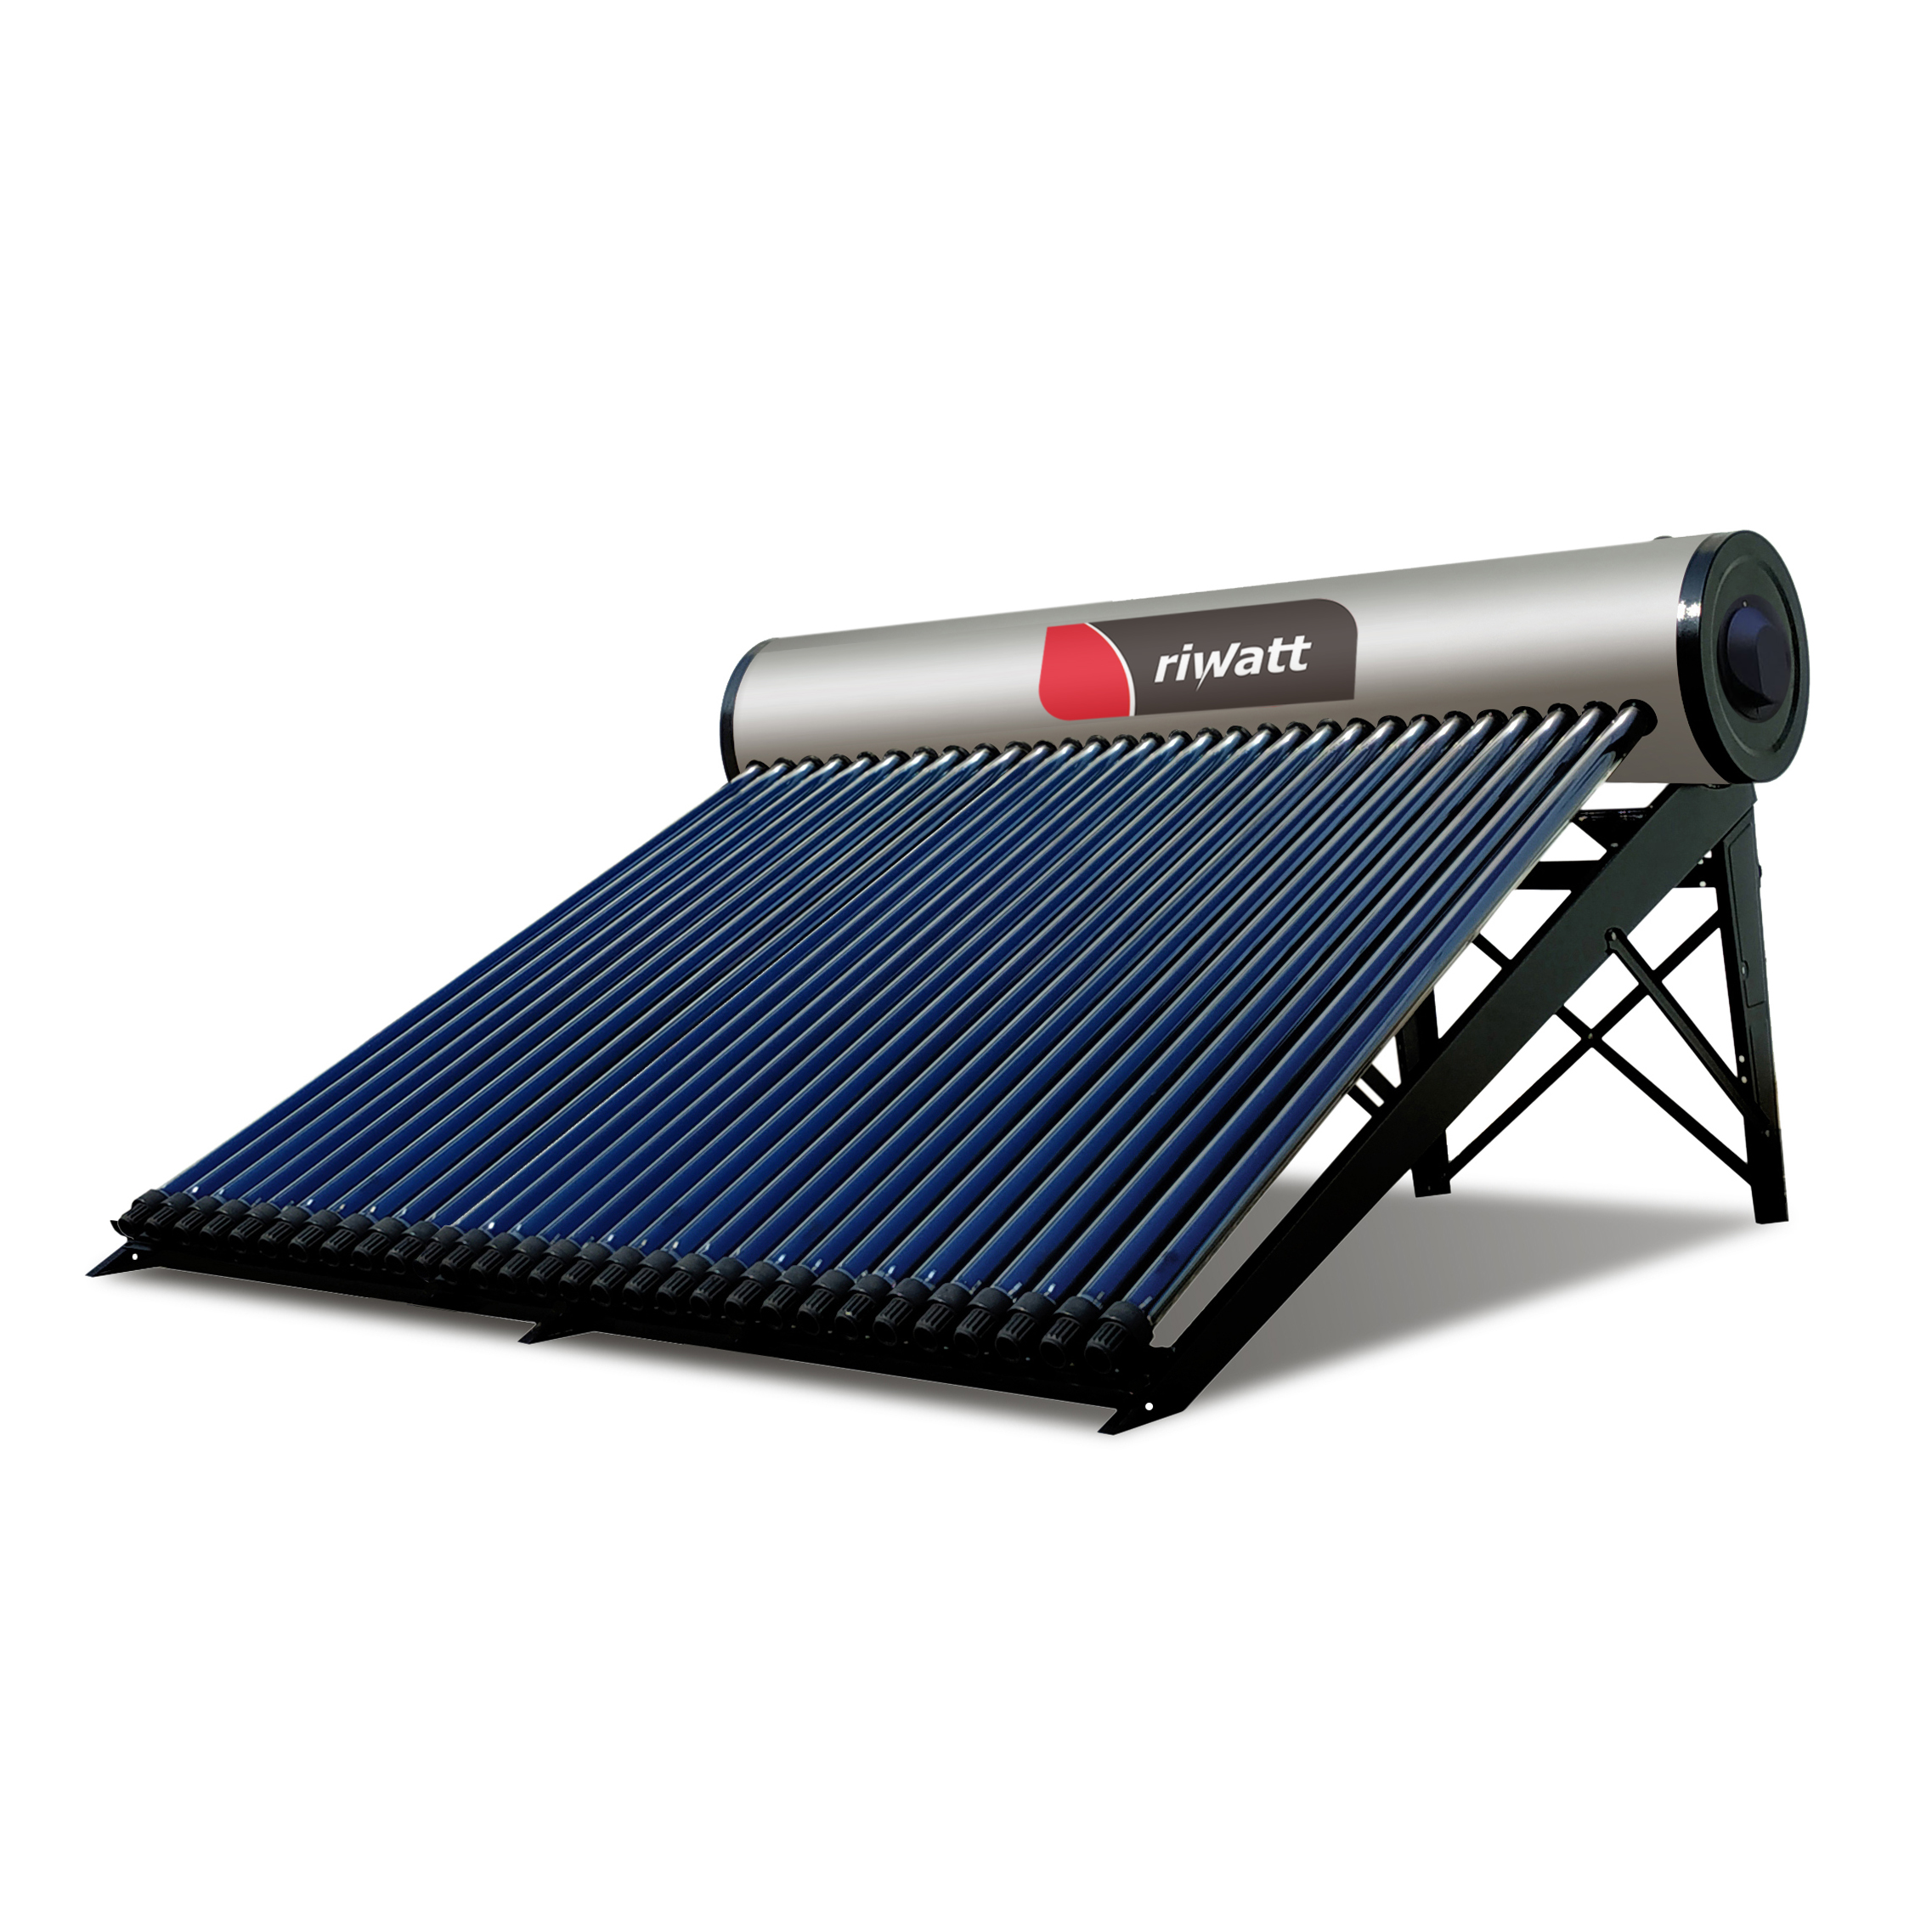 A solar water heater for free energy recovery - Solar Brother